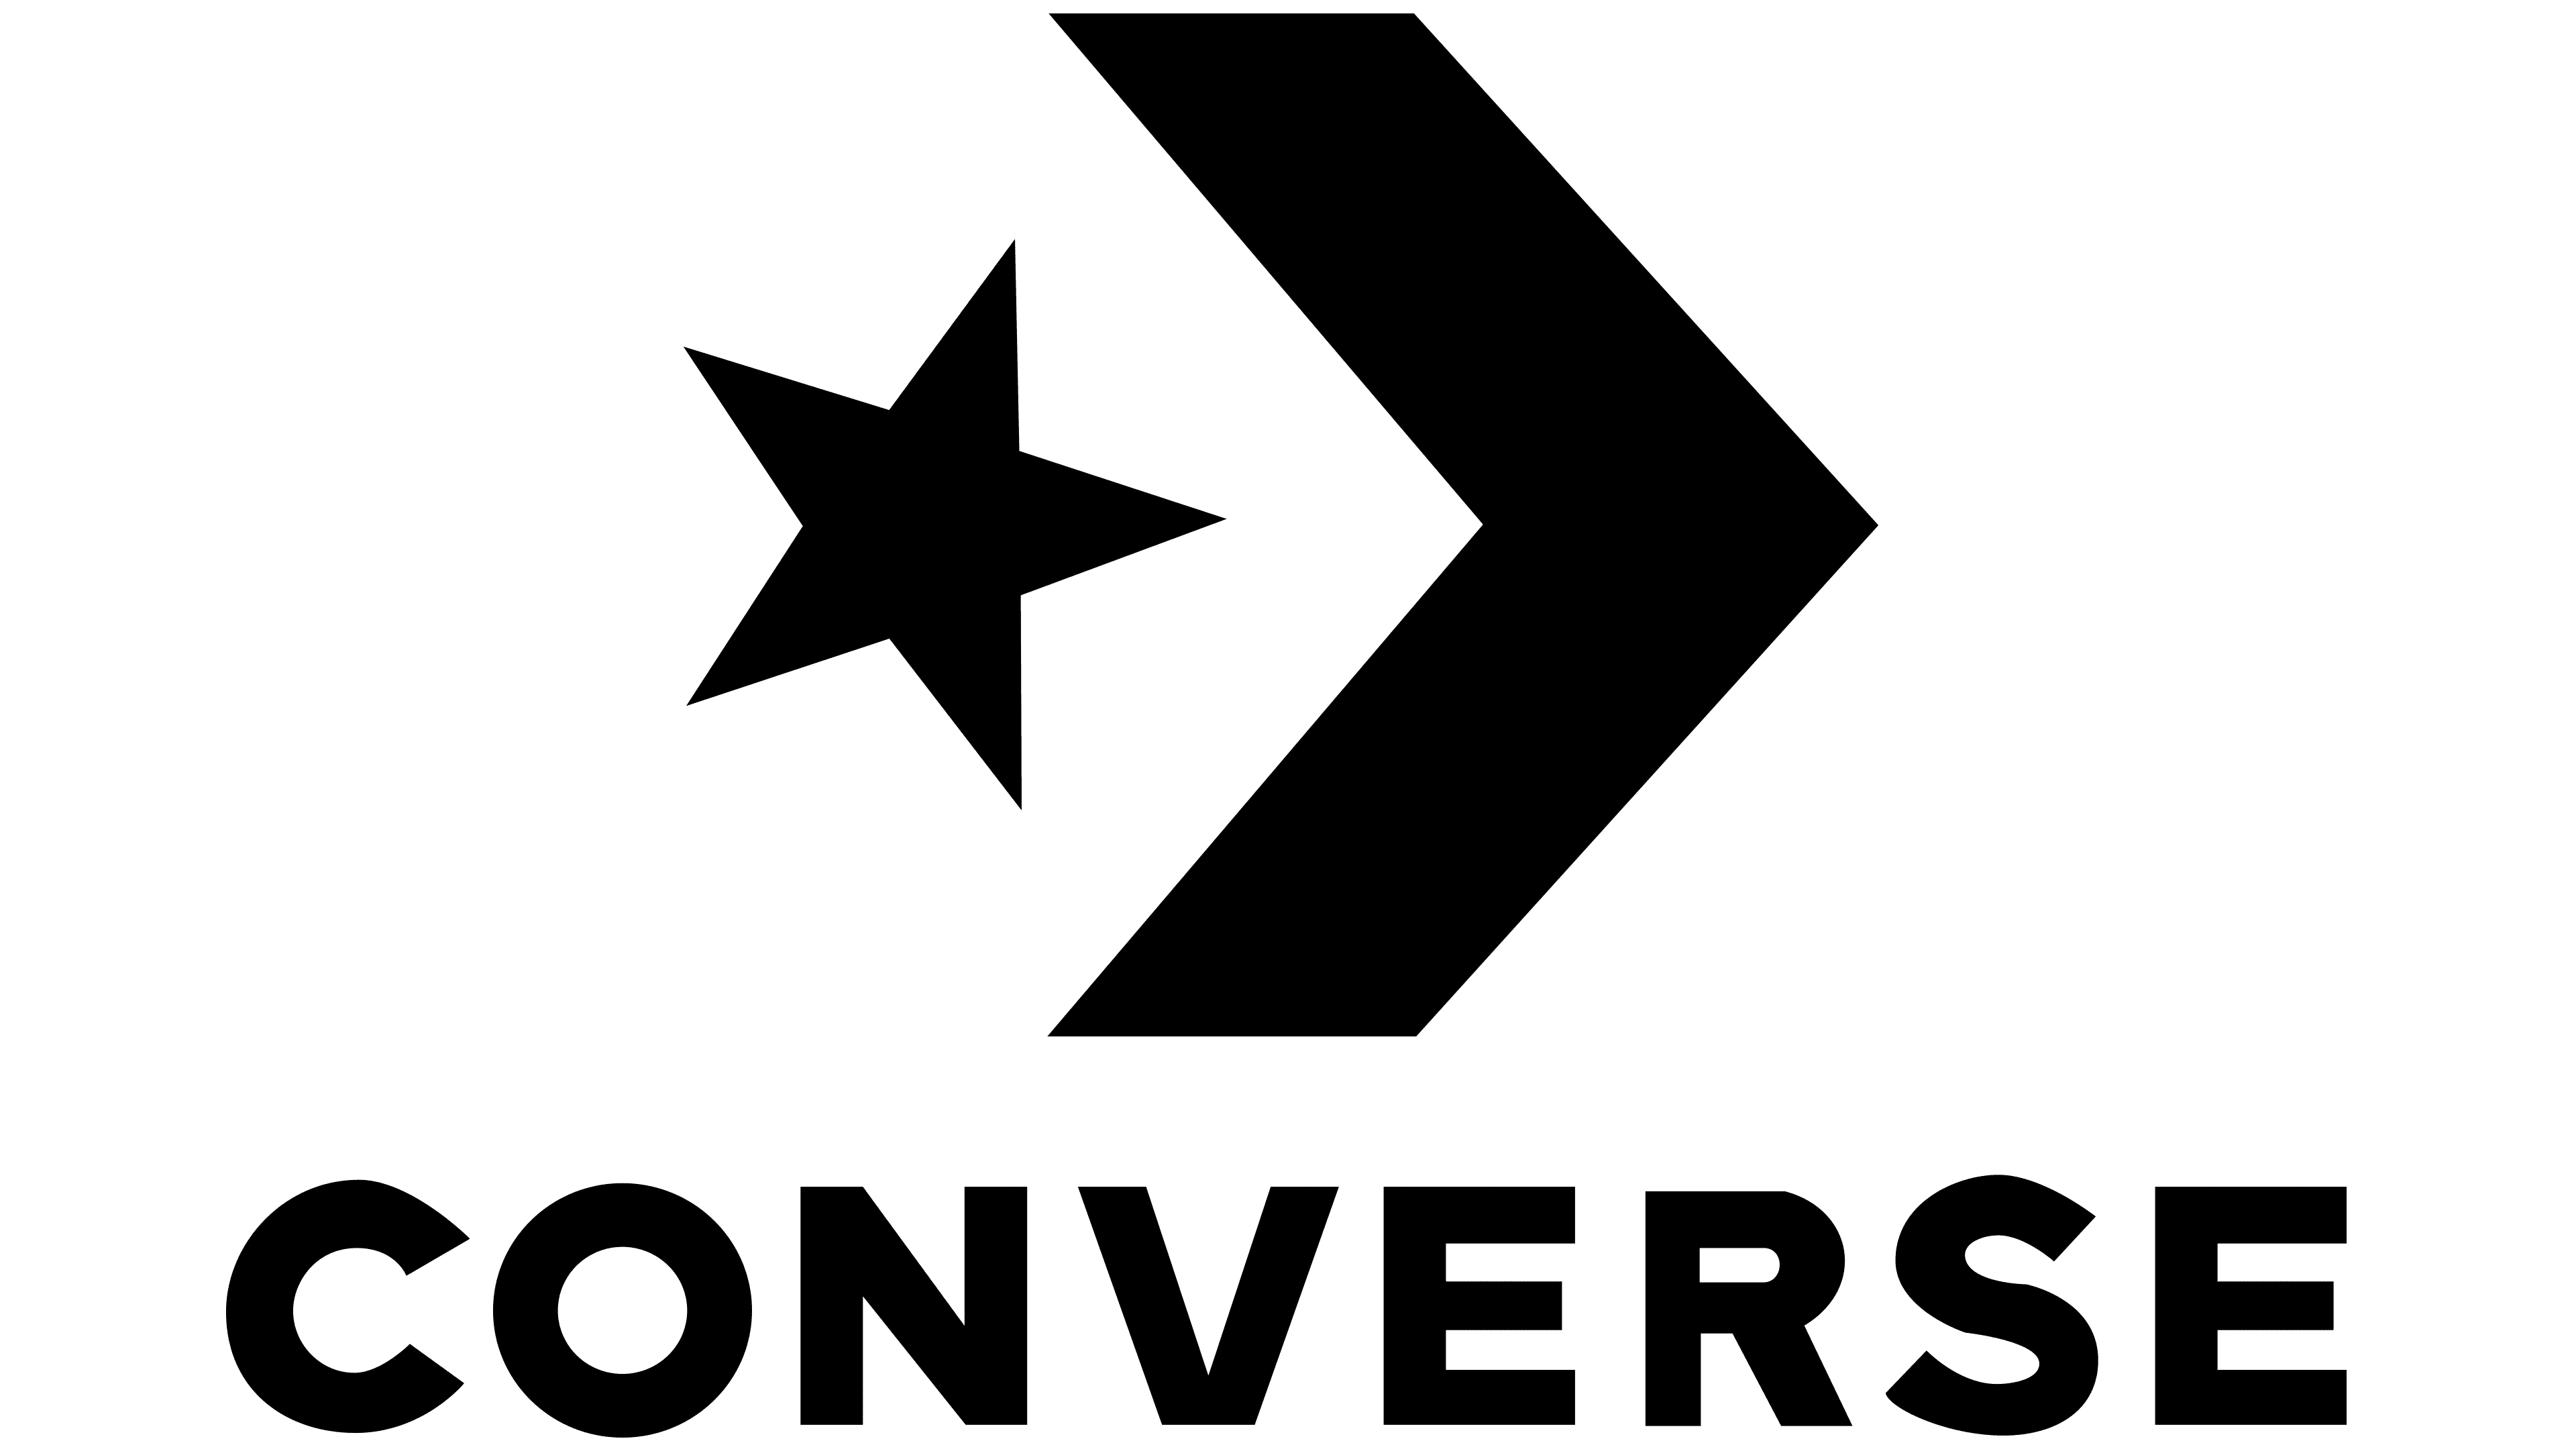 converse logo over the years